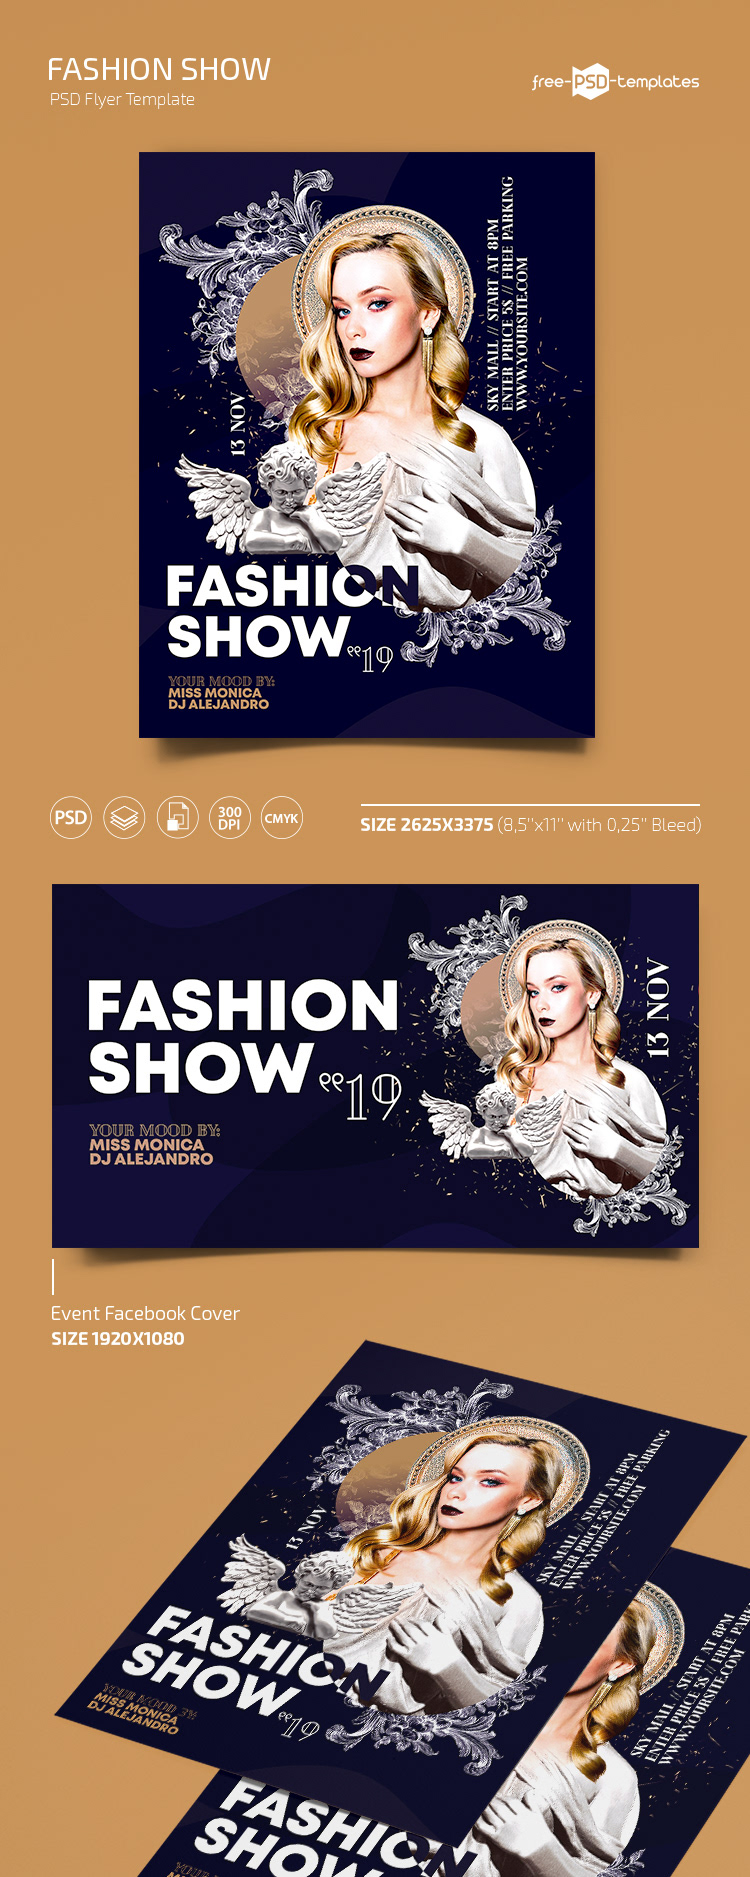 Free Fashion Show Flyer Template In Psd On Behance